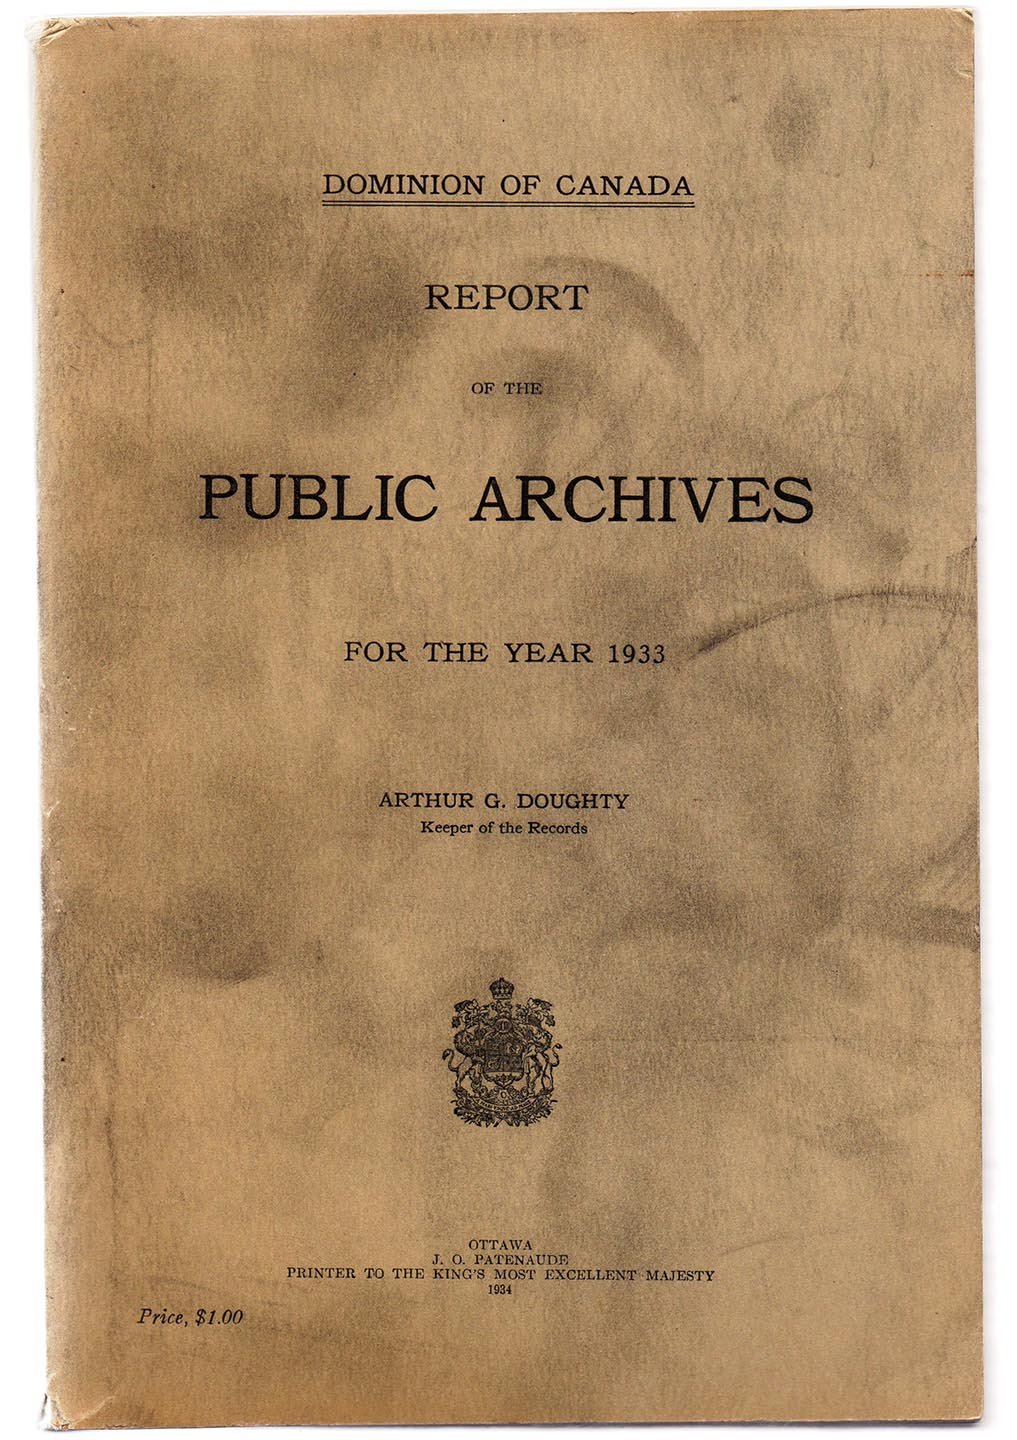 Report of the Public Archives For the Year 1933